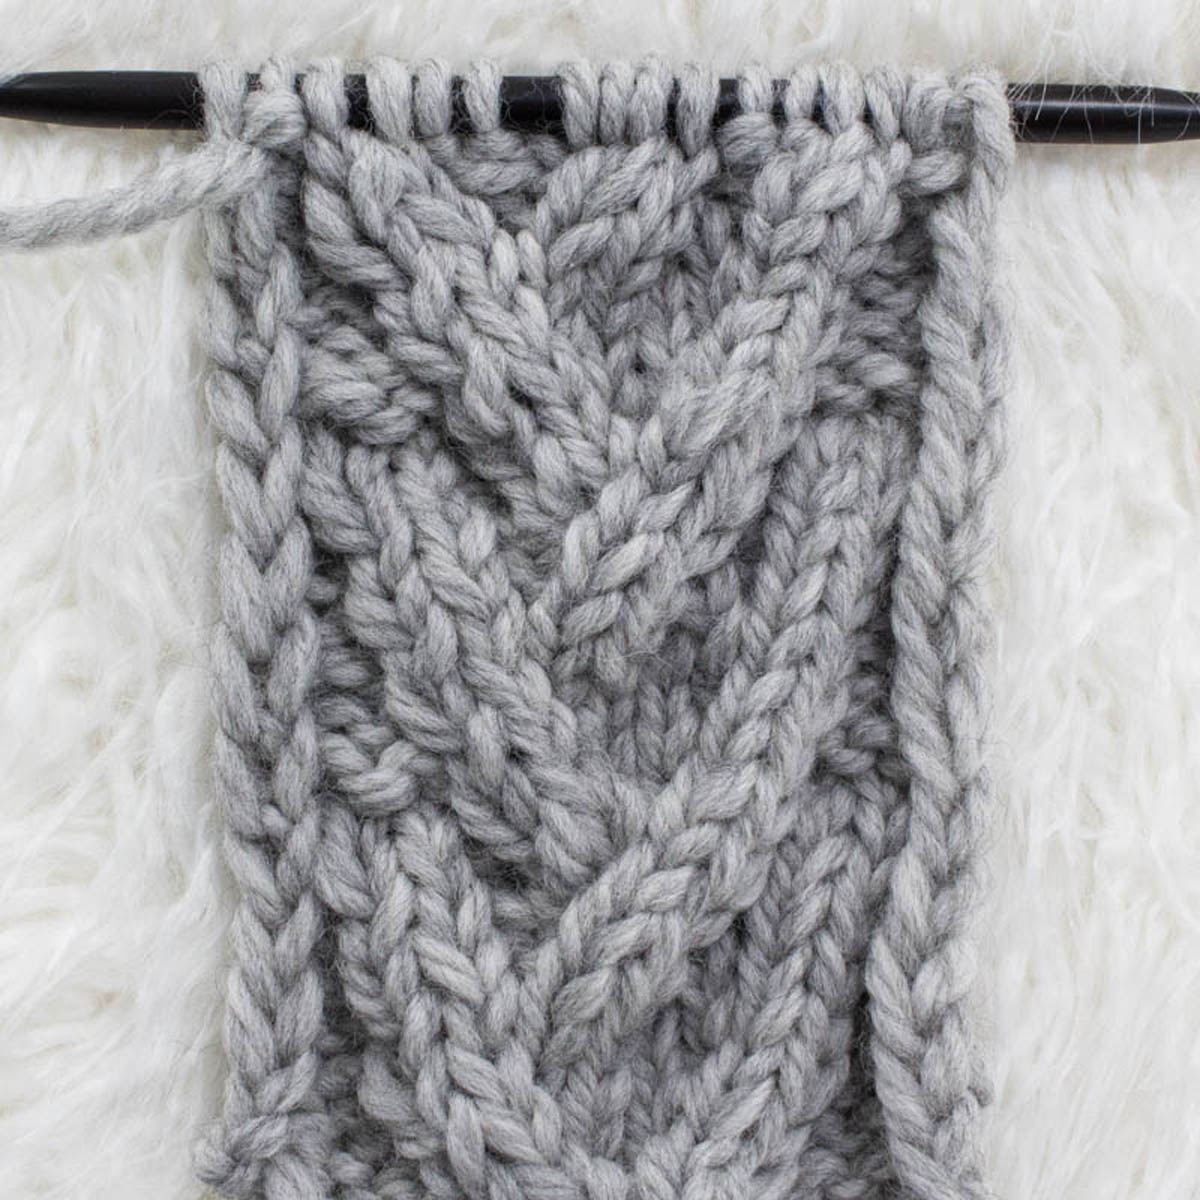 Open V-Stitch Cable Knitting Stitch : Download it Now